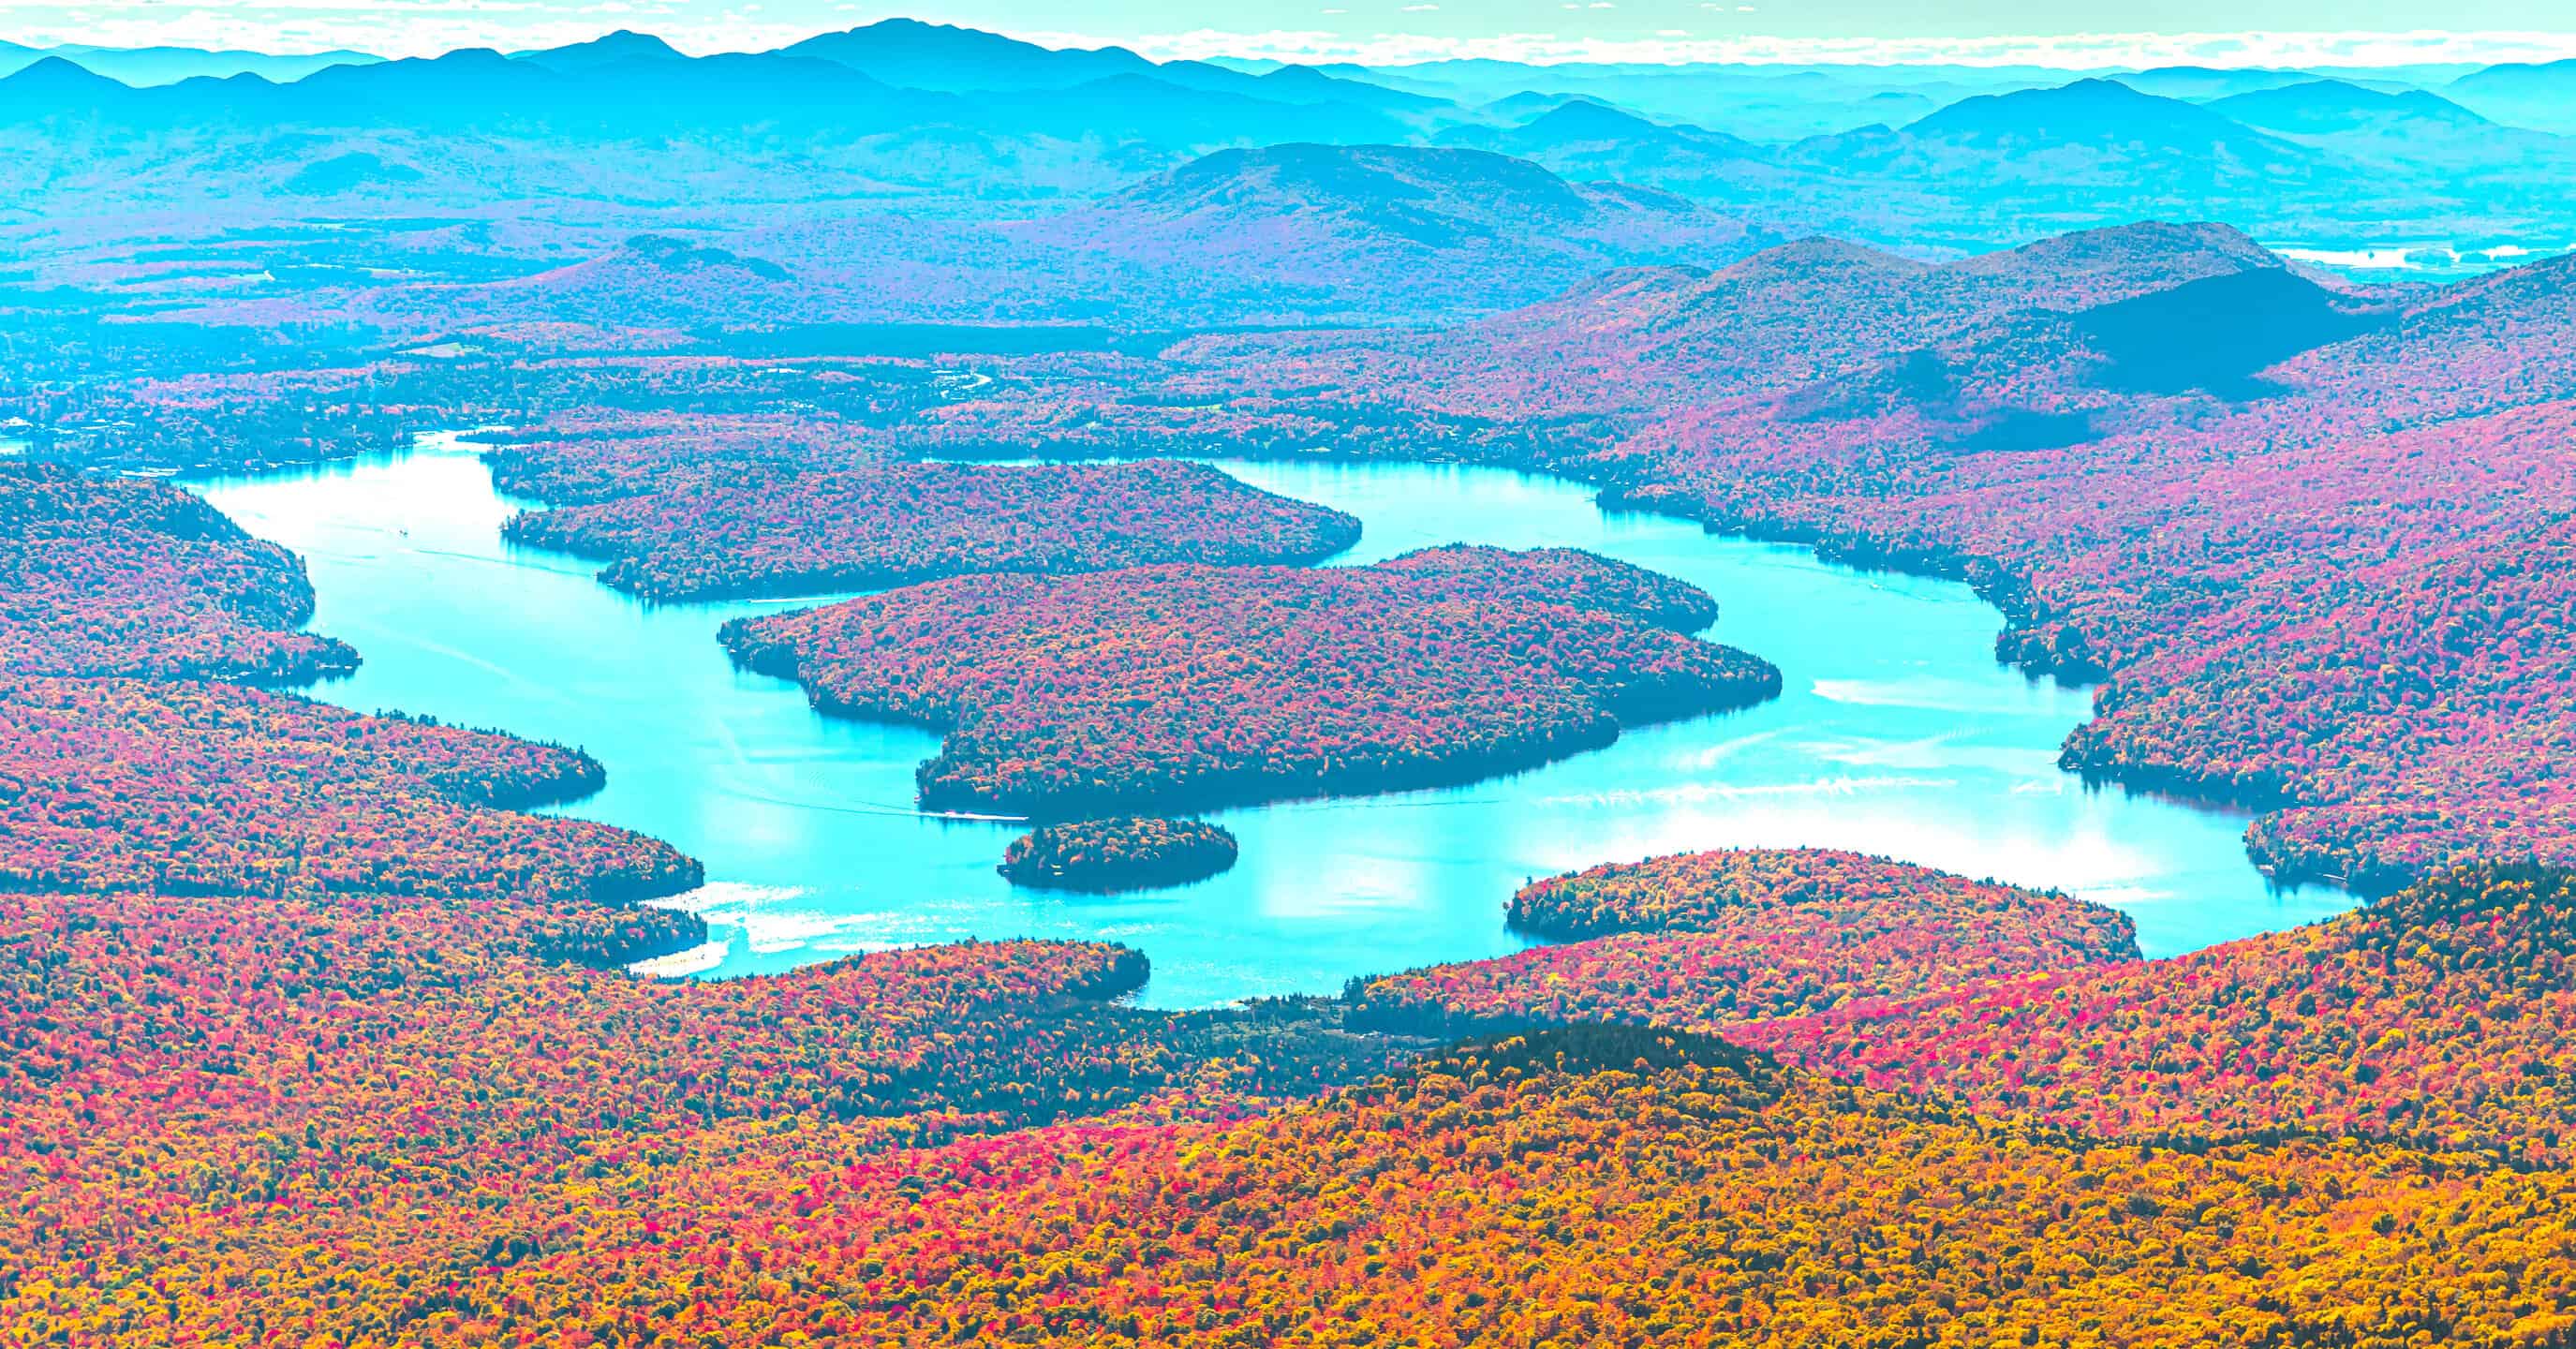 Aerial view of Lake Placid, NY, with fall foliage